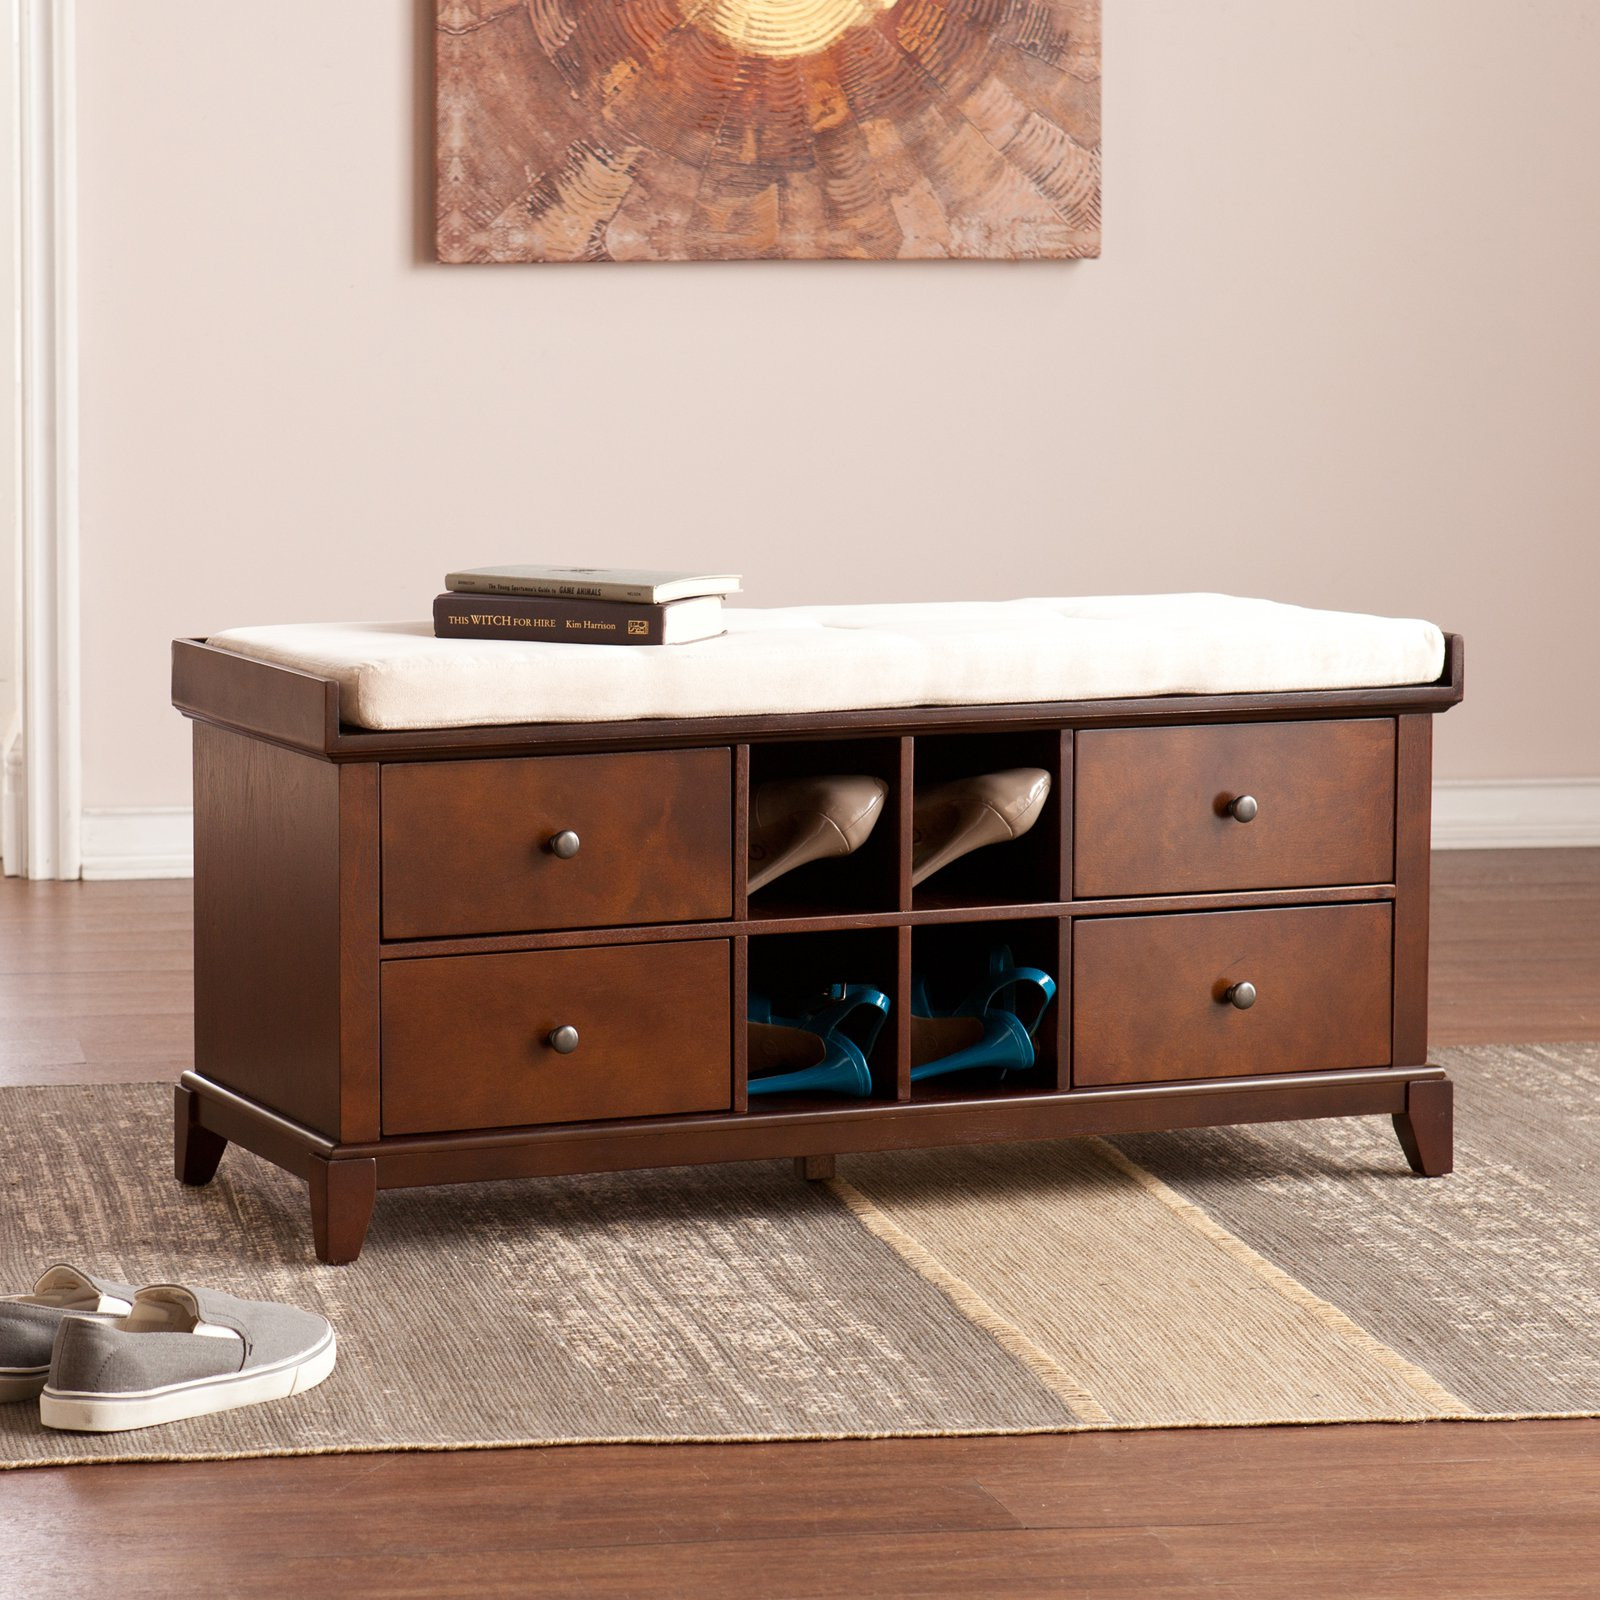 Shoe Storage Bench With Cushion
 Southern Enterprises Hulen Shoe Storage Bench with Cushion